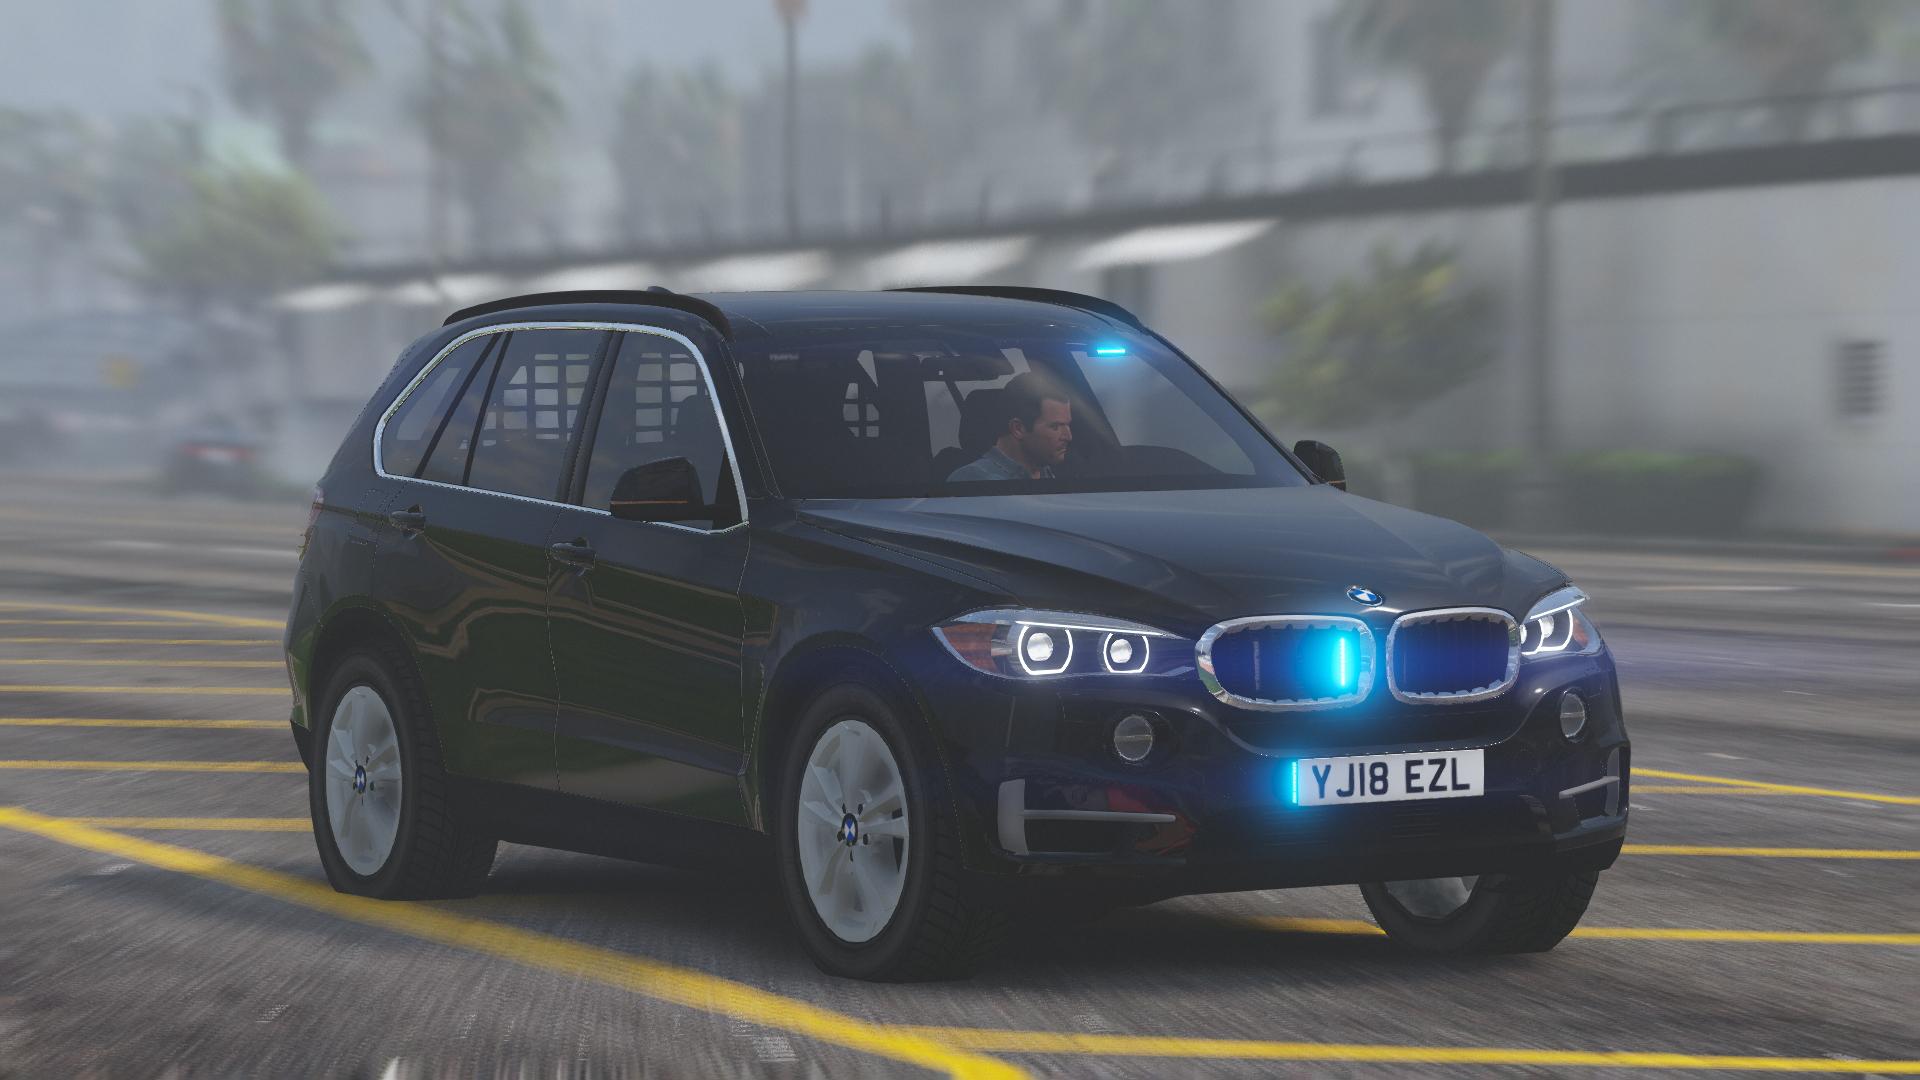 Generic Unmarked BMW X5 - Armed Response Vehicle - GTA5-Mods.com